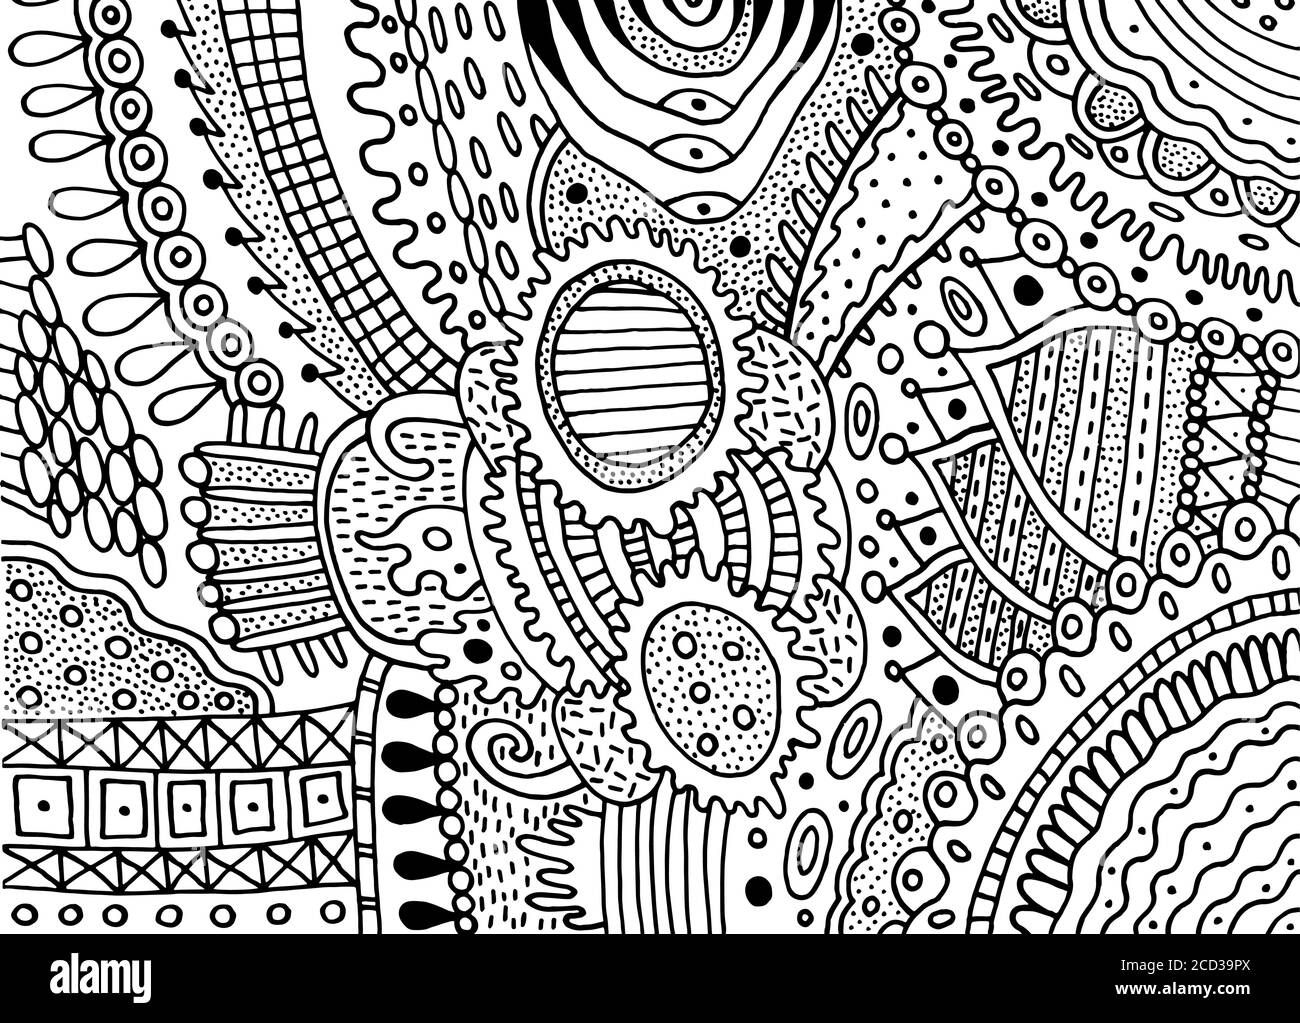 Boho doodle pattern for coloring book for adults coloring page with floral motifs psychedelic texture zentangle pattern vector illustration stock vector image art